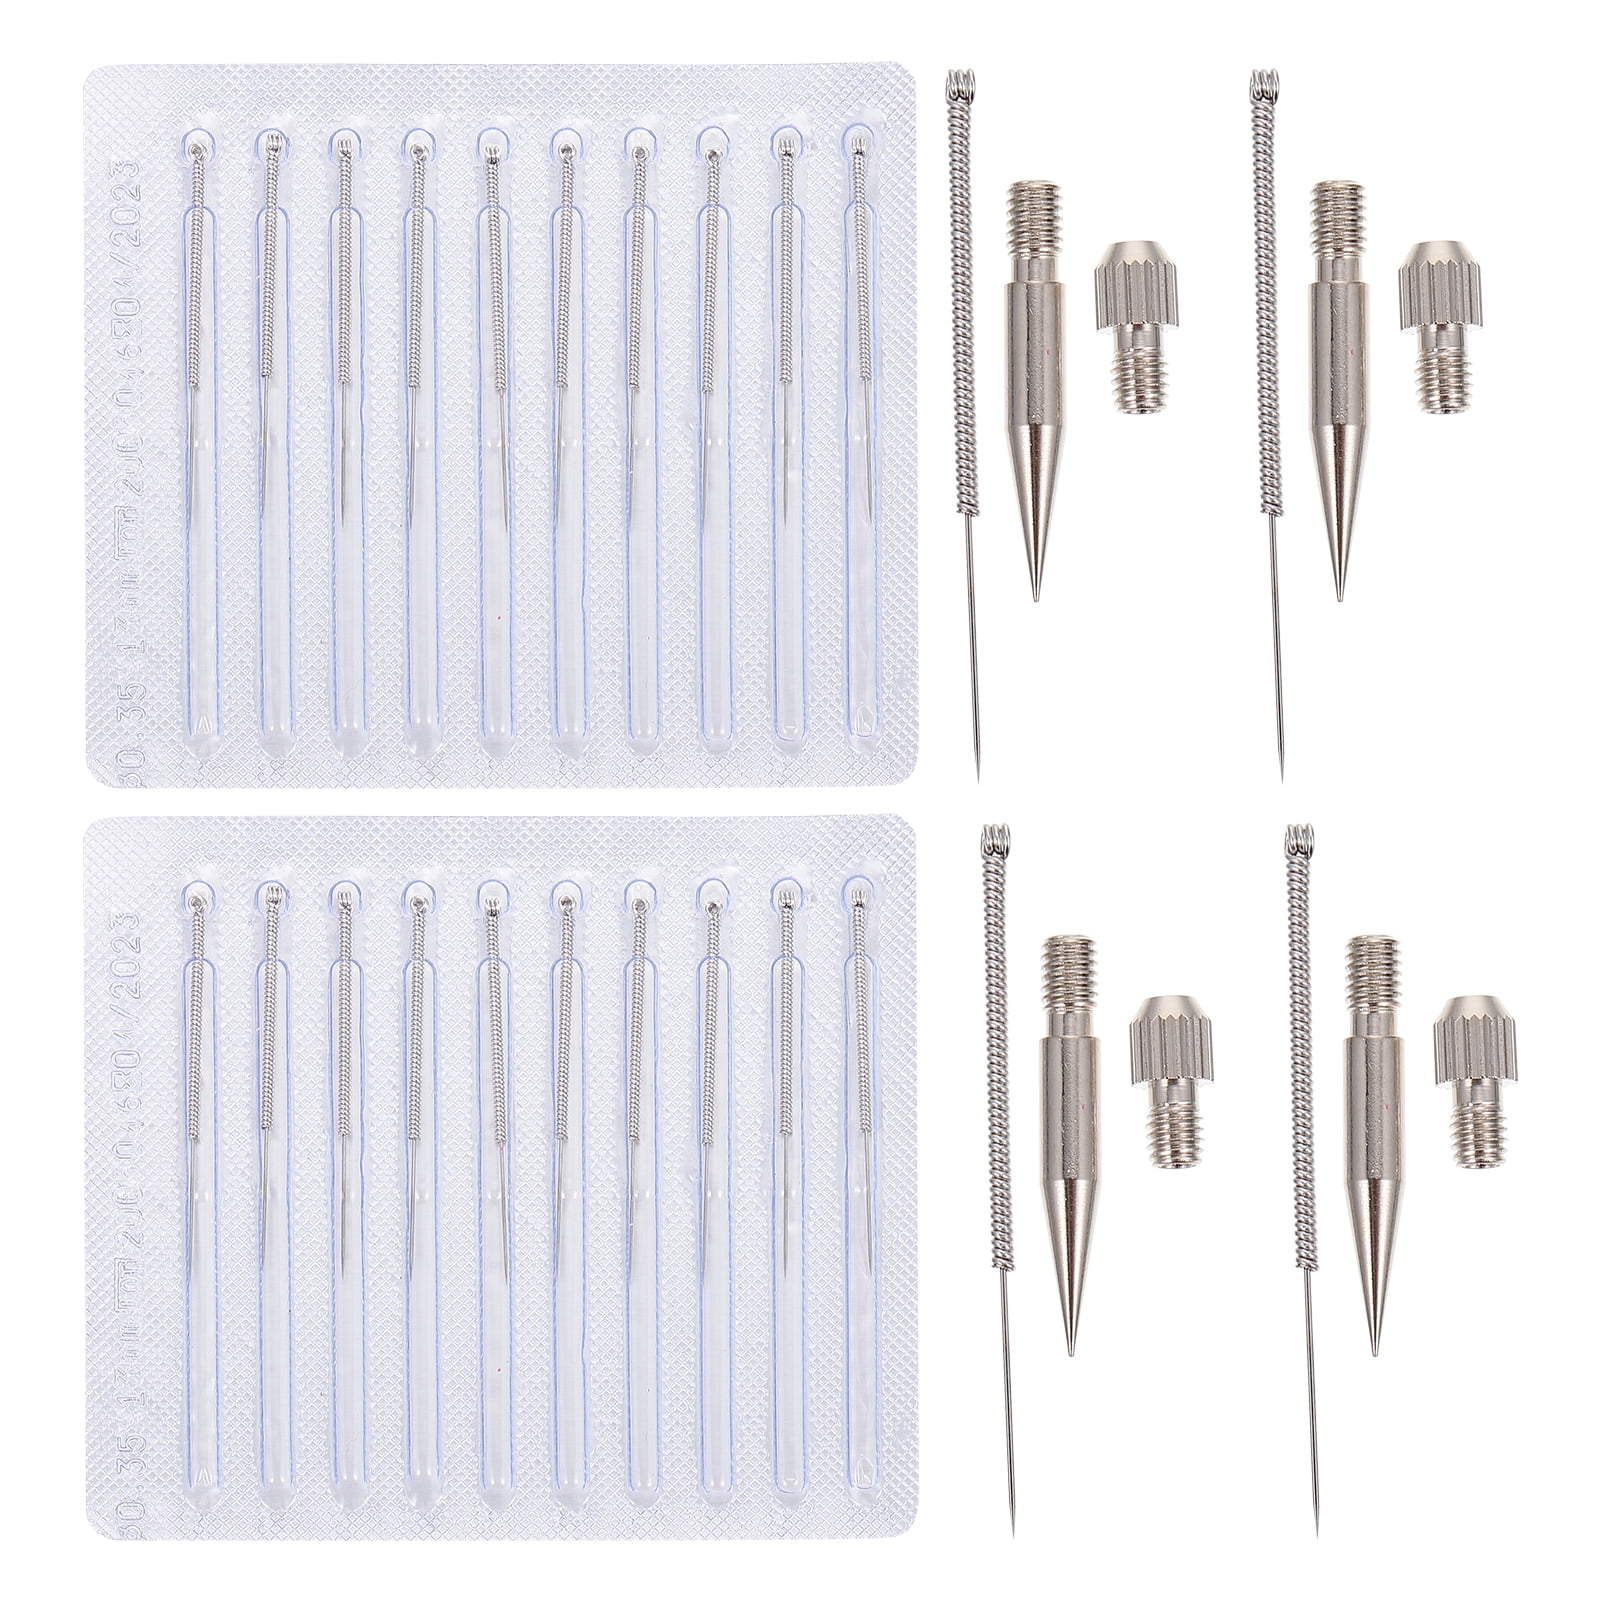 Rosarivae 1 Set of Dot Mole Pen Needles Special Needle for Nevus for ...